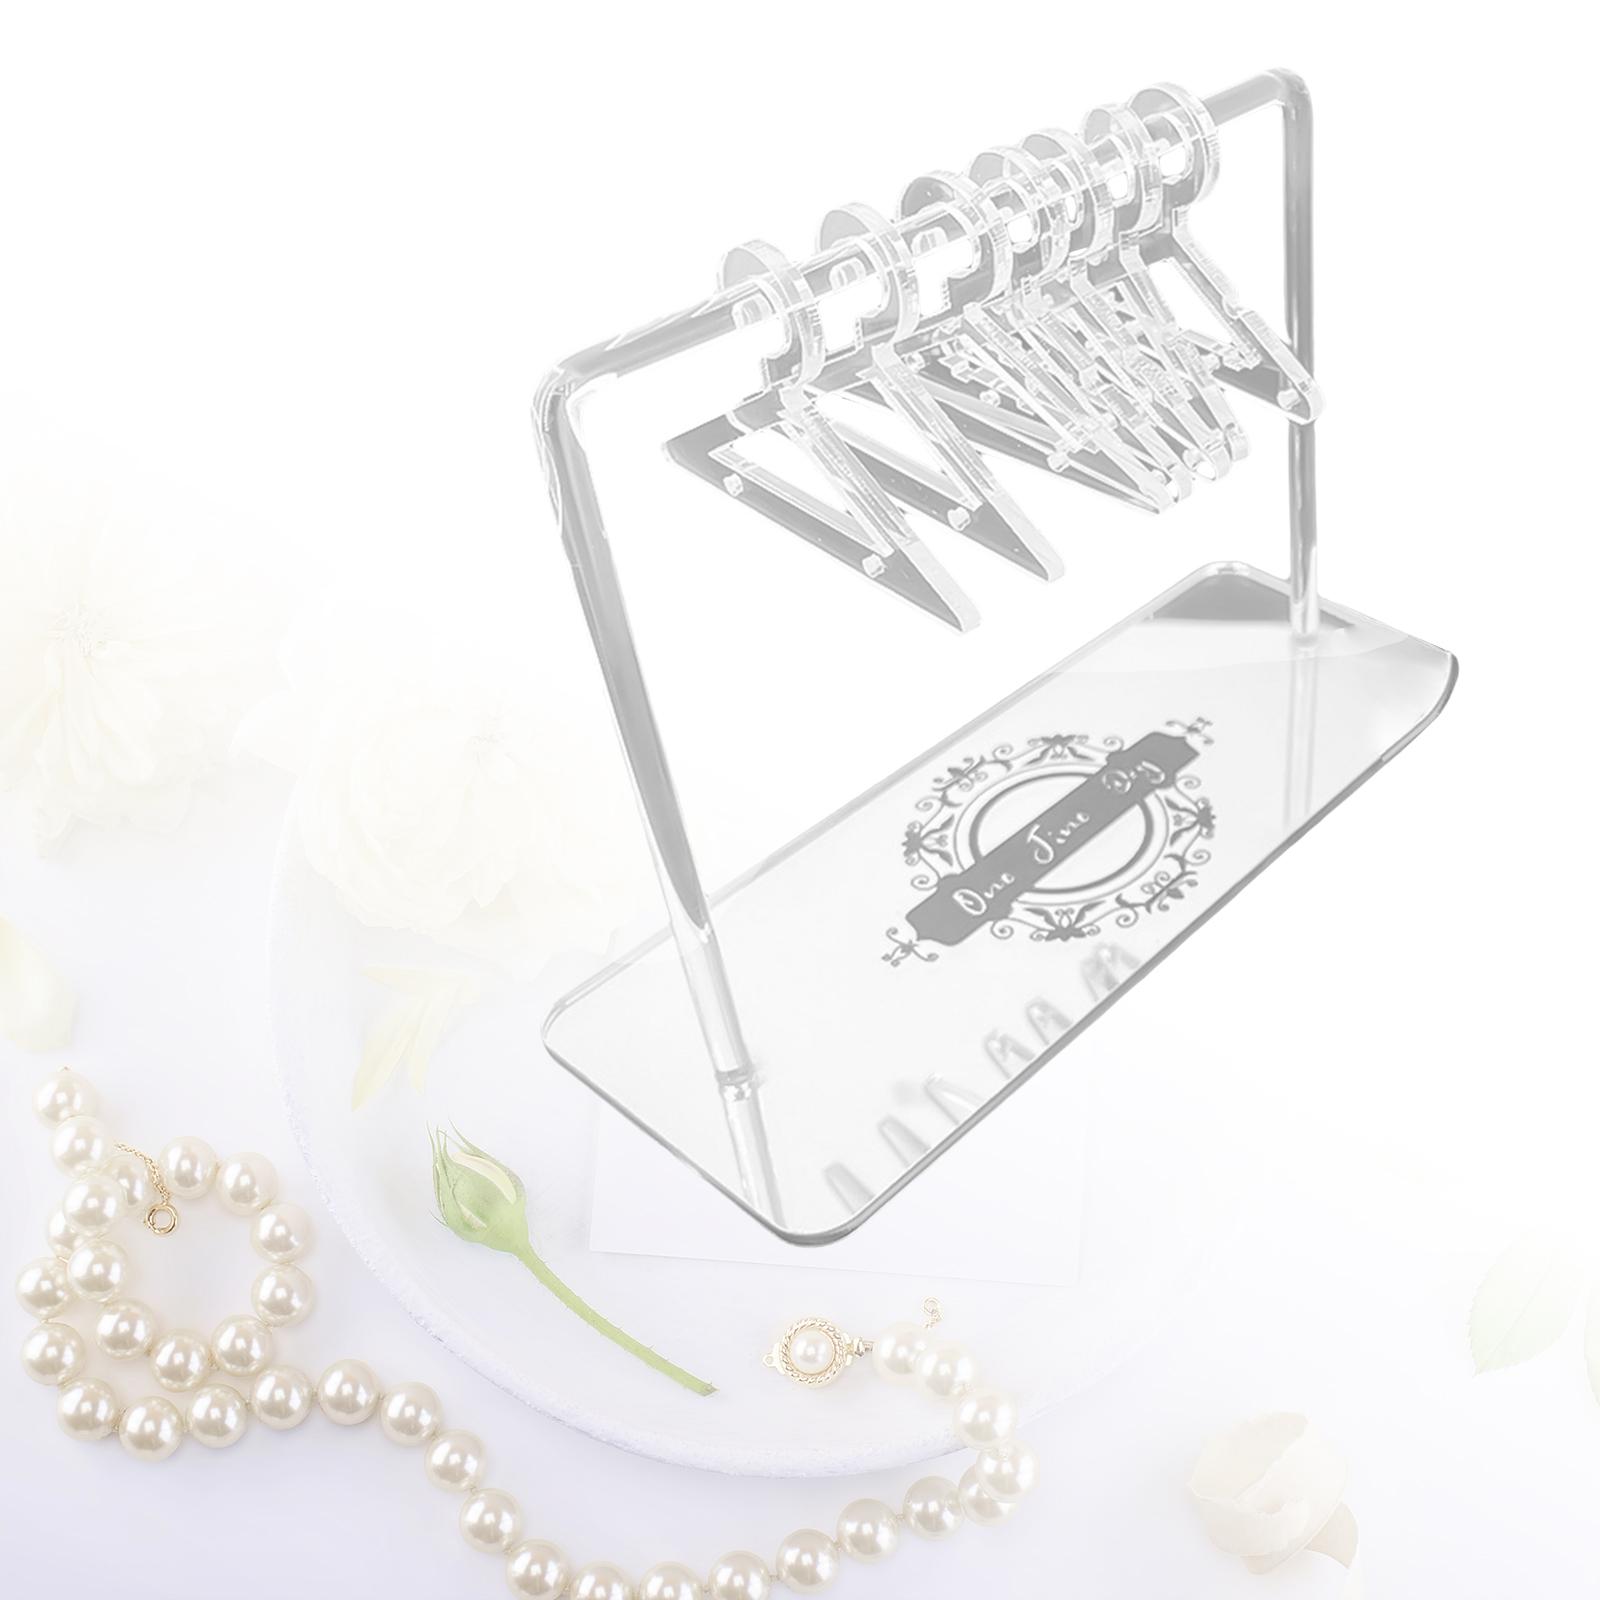 Detachable Acrylic Earring Hanger Rack Storage Display Stand for Women Girls Clear